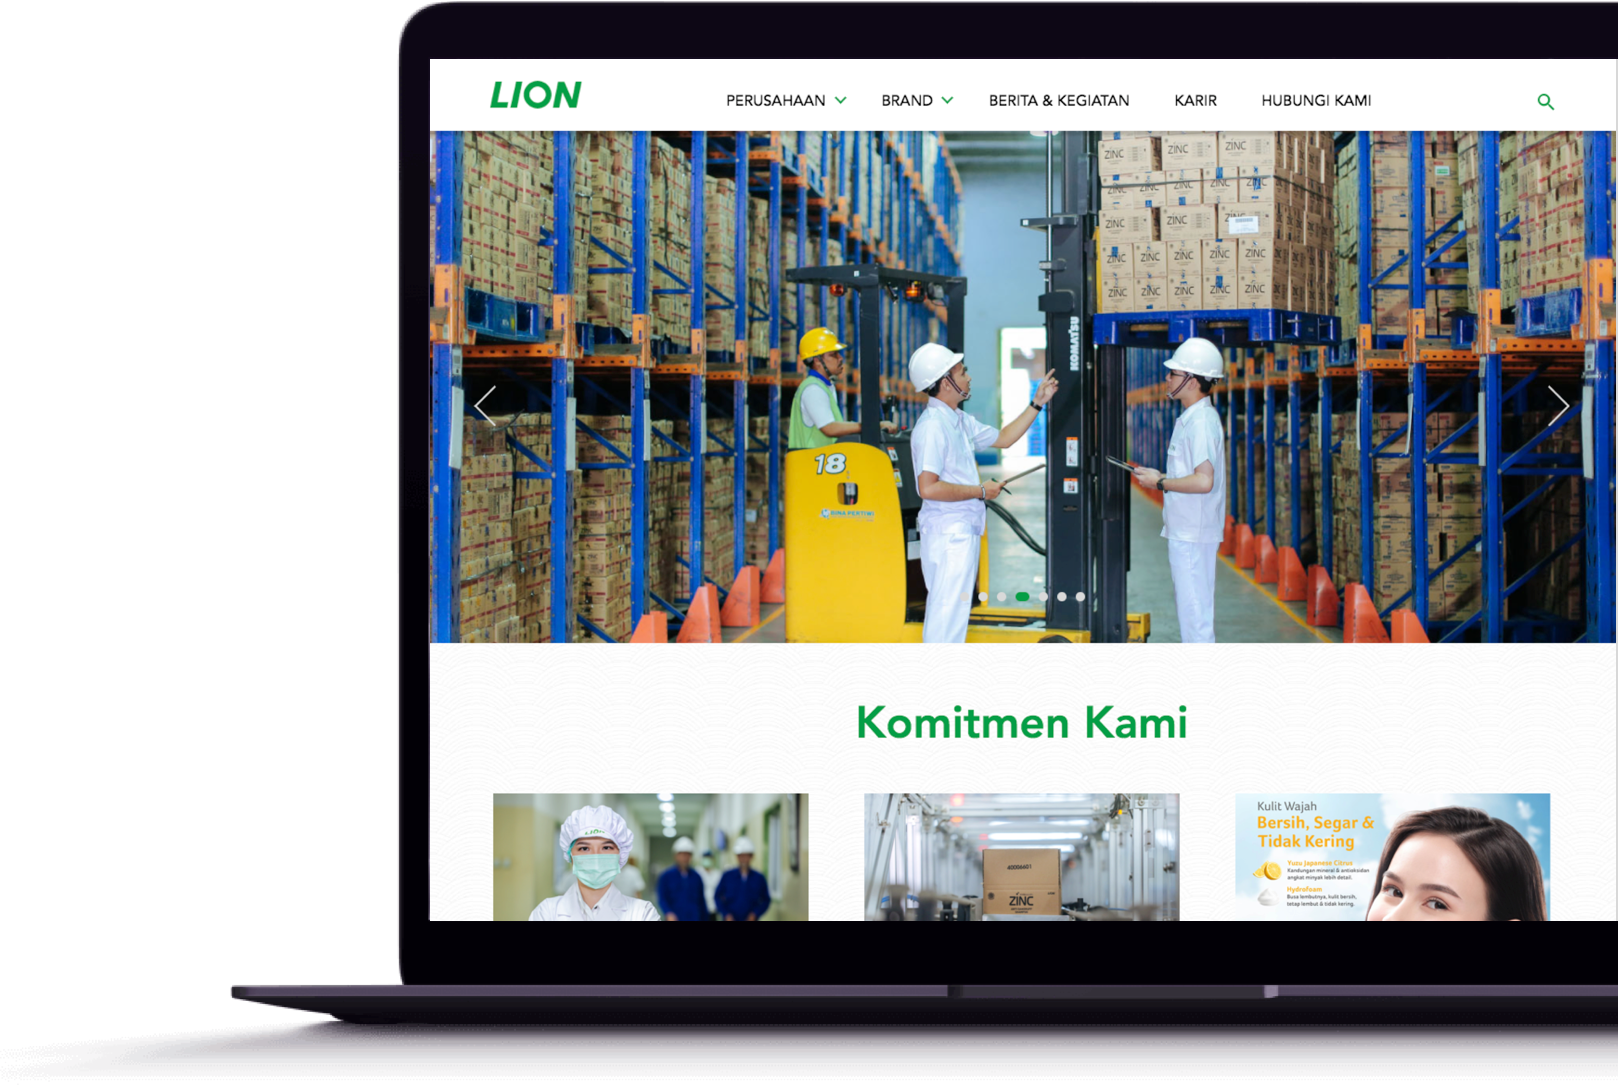 Strengthen LION Wings' reputation as a leading FMCG company